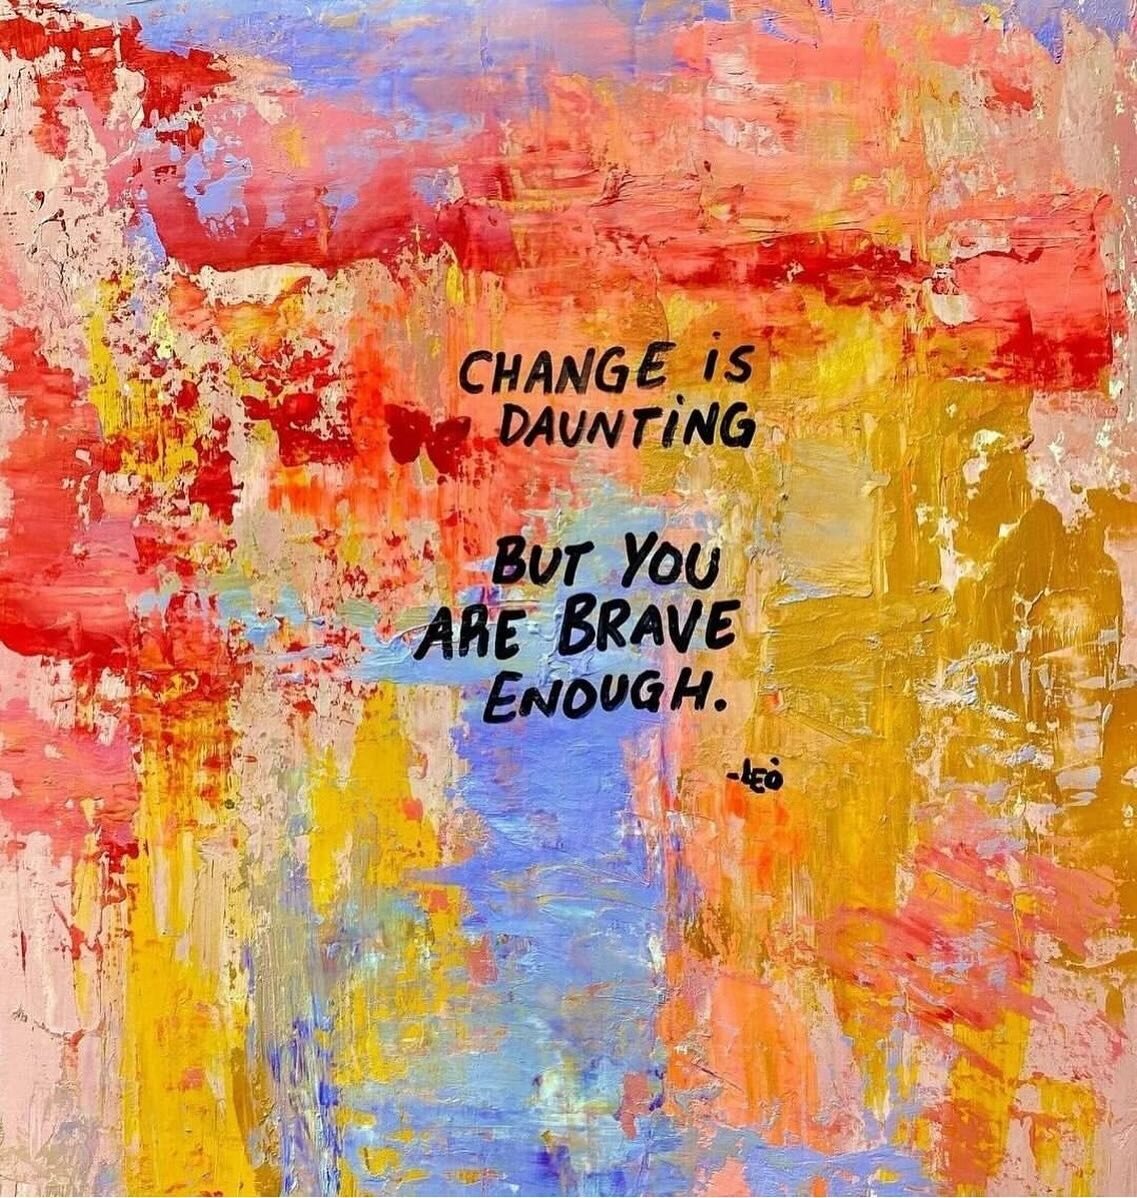 Being brave doesn&rsquo;t mean the absence of fear; rather, it&rsquo;s the audacity to confront fear head-on and proceed despite it. It&rsquo;s about acknowledging the discomfort that change brings and still choosing to move forward. It&rsquo;s a rec